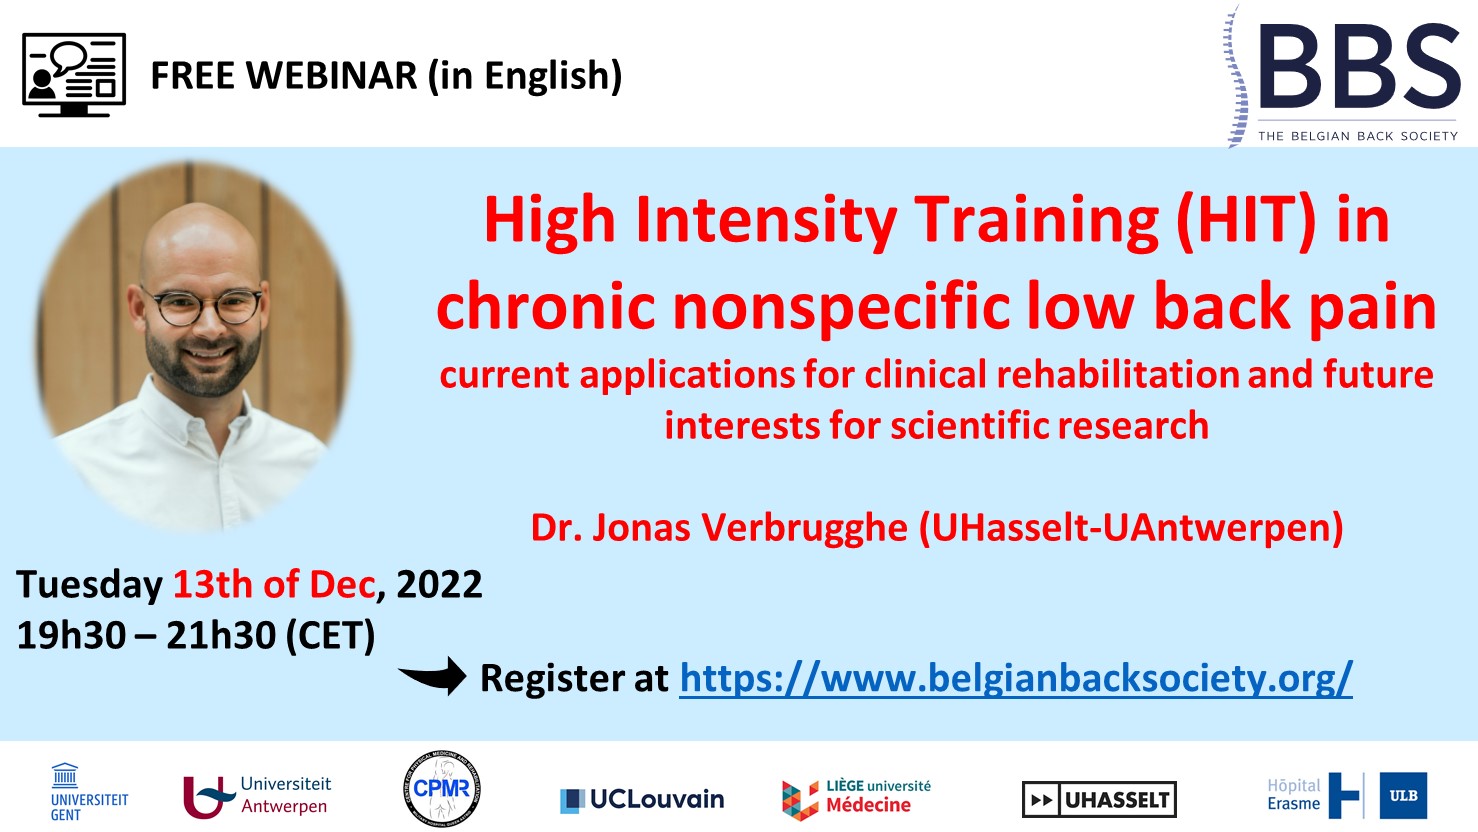 Webinar : High Intensity Training (HIT) in chronic nonspecific low back pain